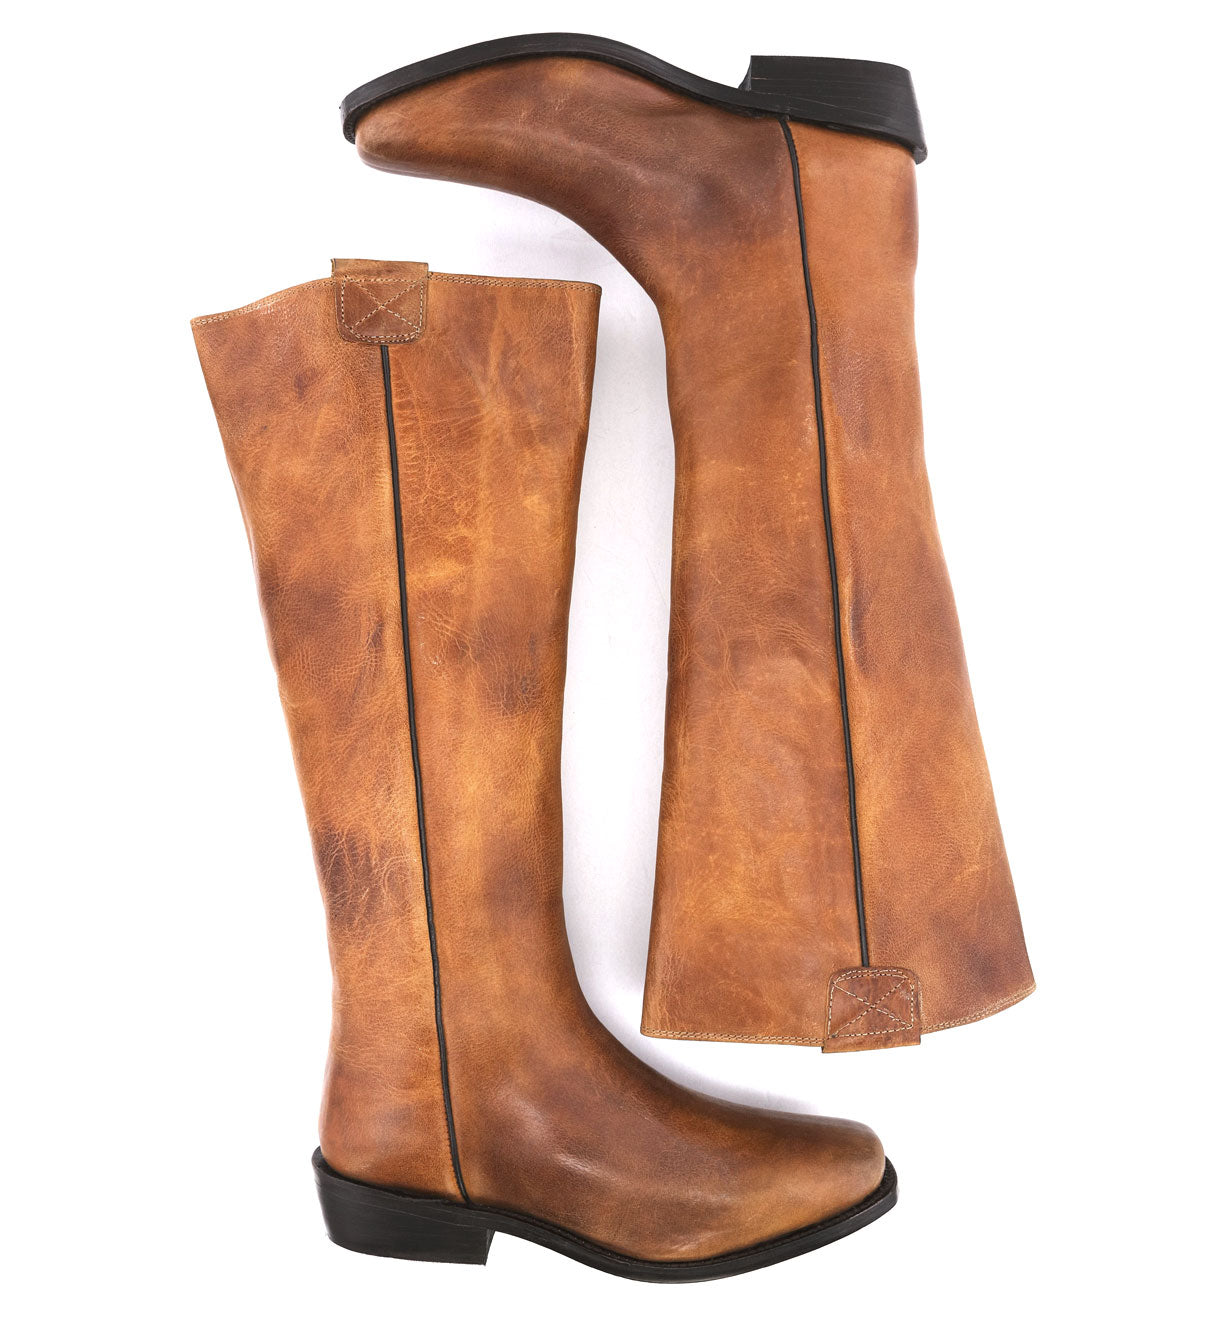 A pair of Oak Tree Farms Pale Rider men's tall leather boots ready for adventures, placed on a white background.